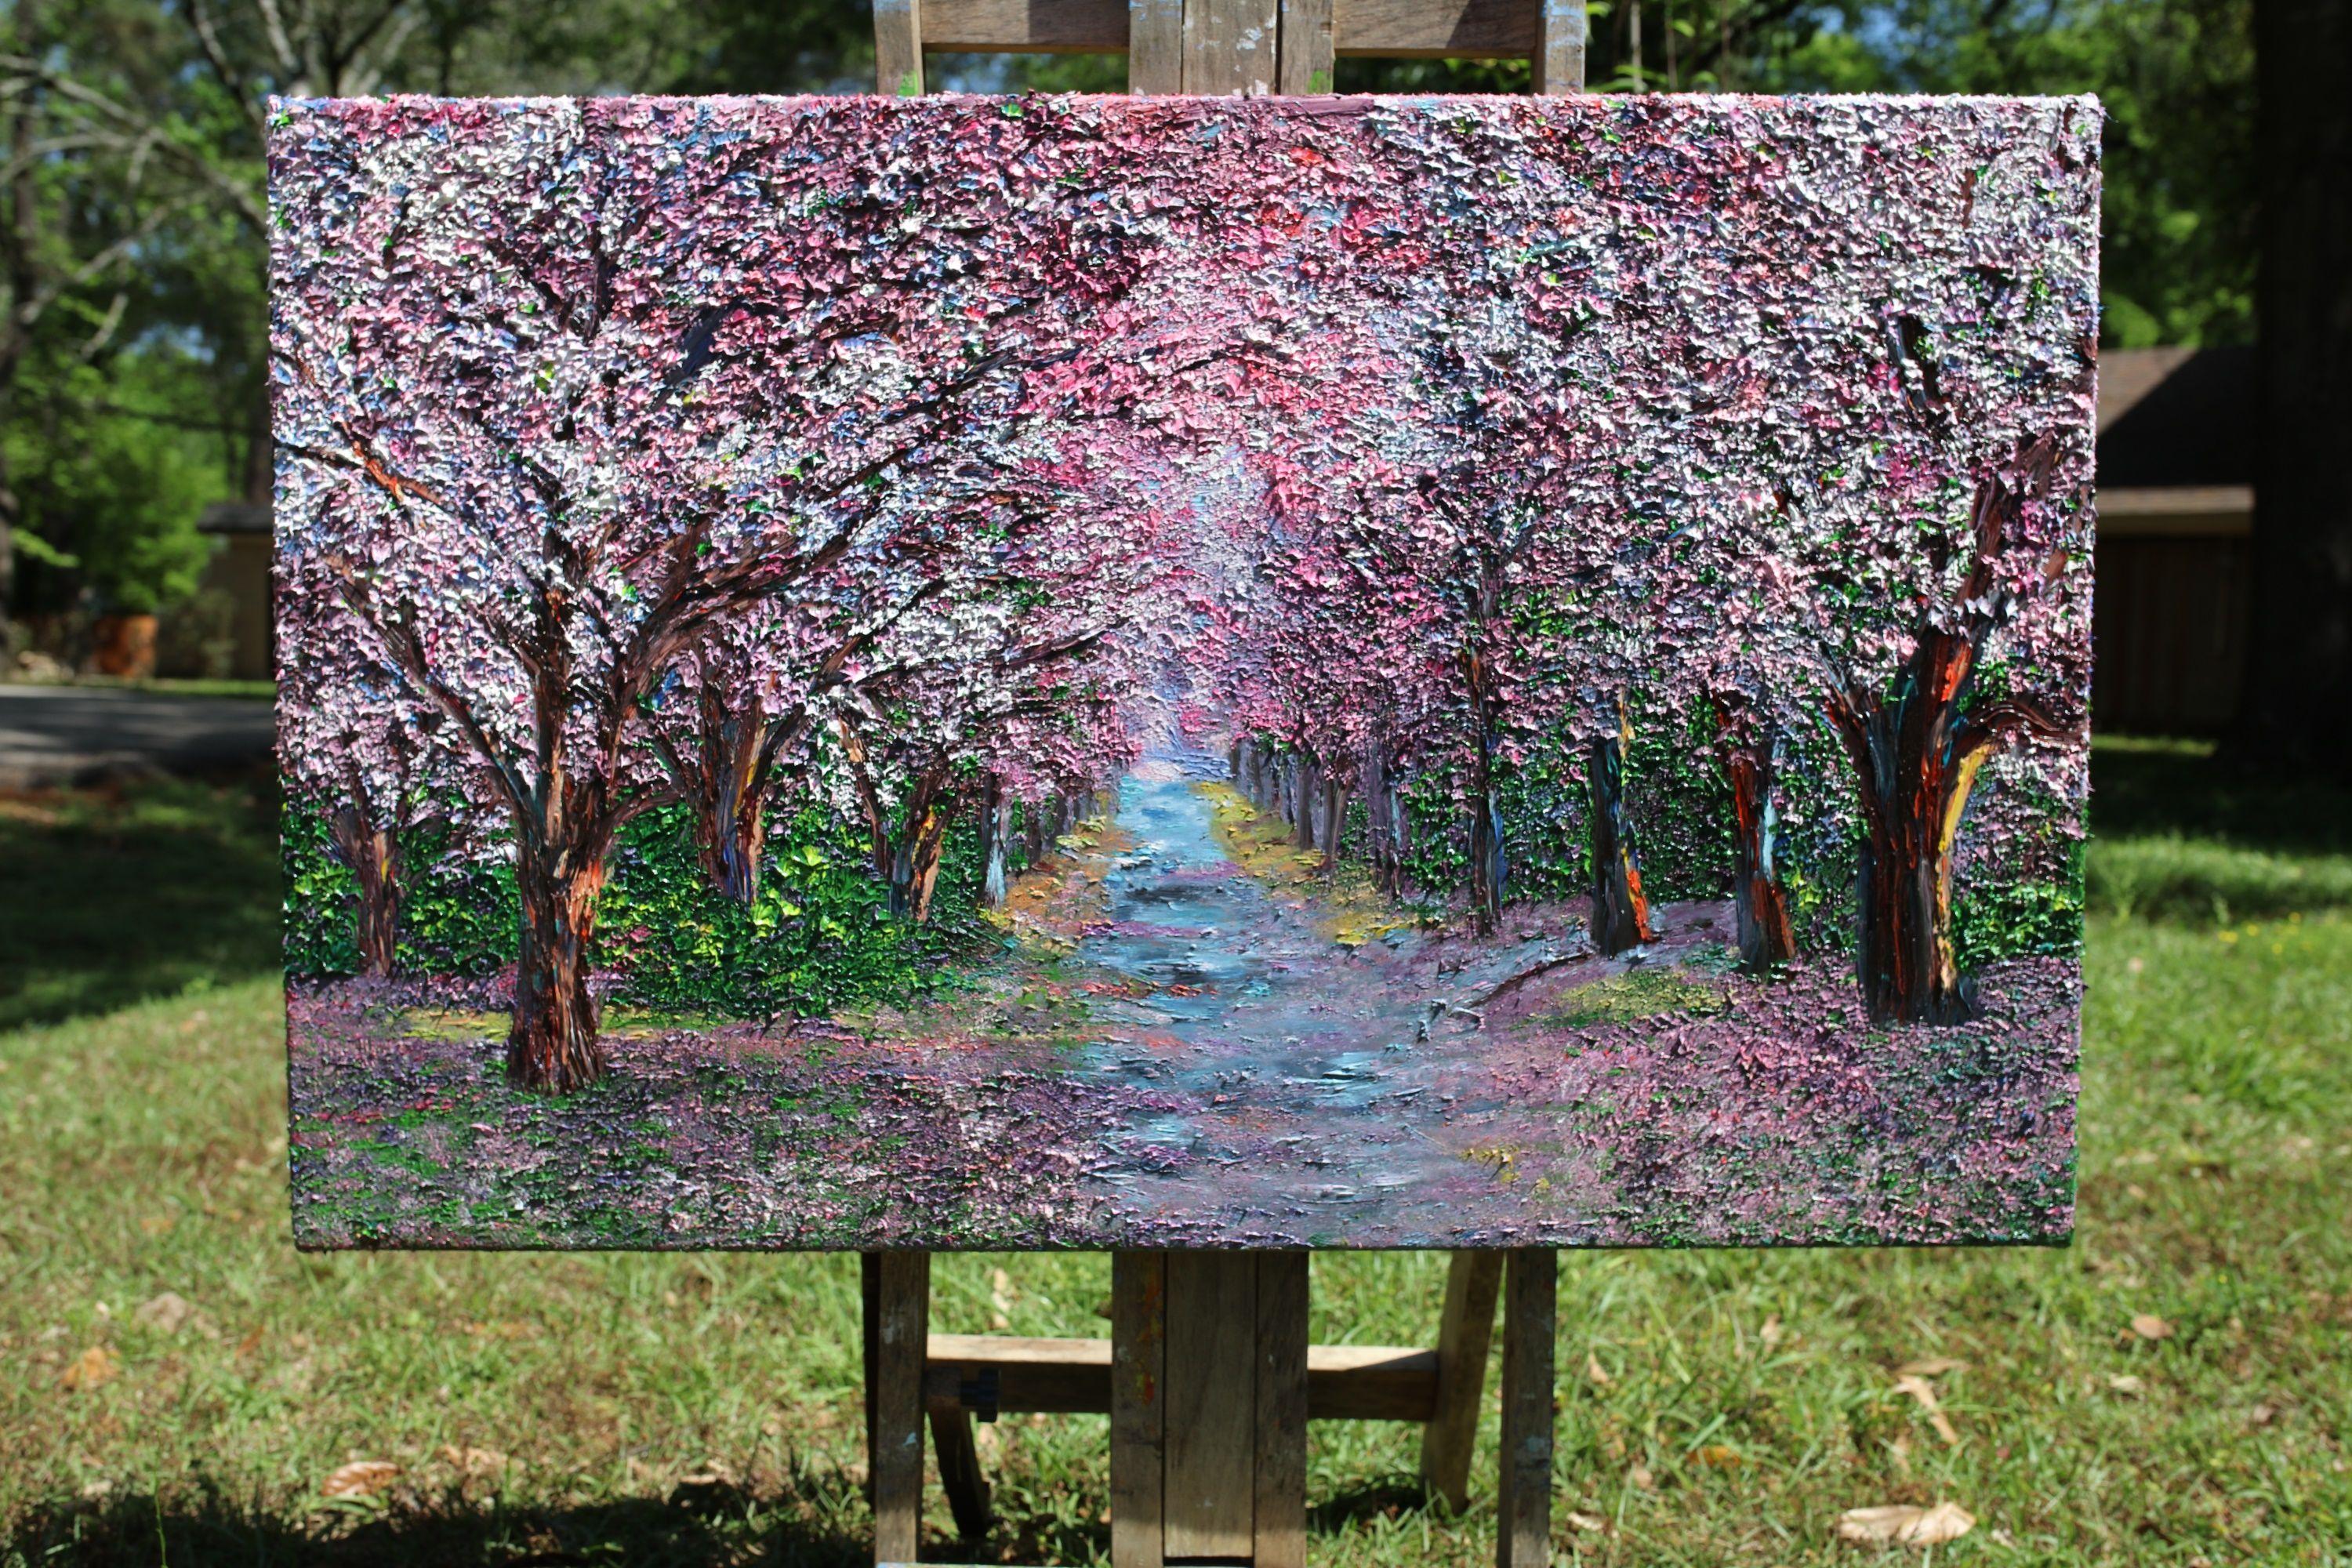 Imagine walking through this trail of beauty as the gentle motion of the blossoms whisper from the canopy above. The seasoned bark of the tree trunks provides a feeling of aged warmth as your eyes flicker at the roseate beauty above. The painting is